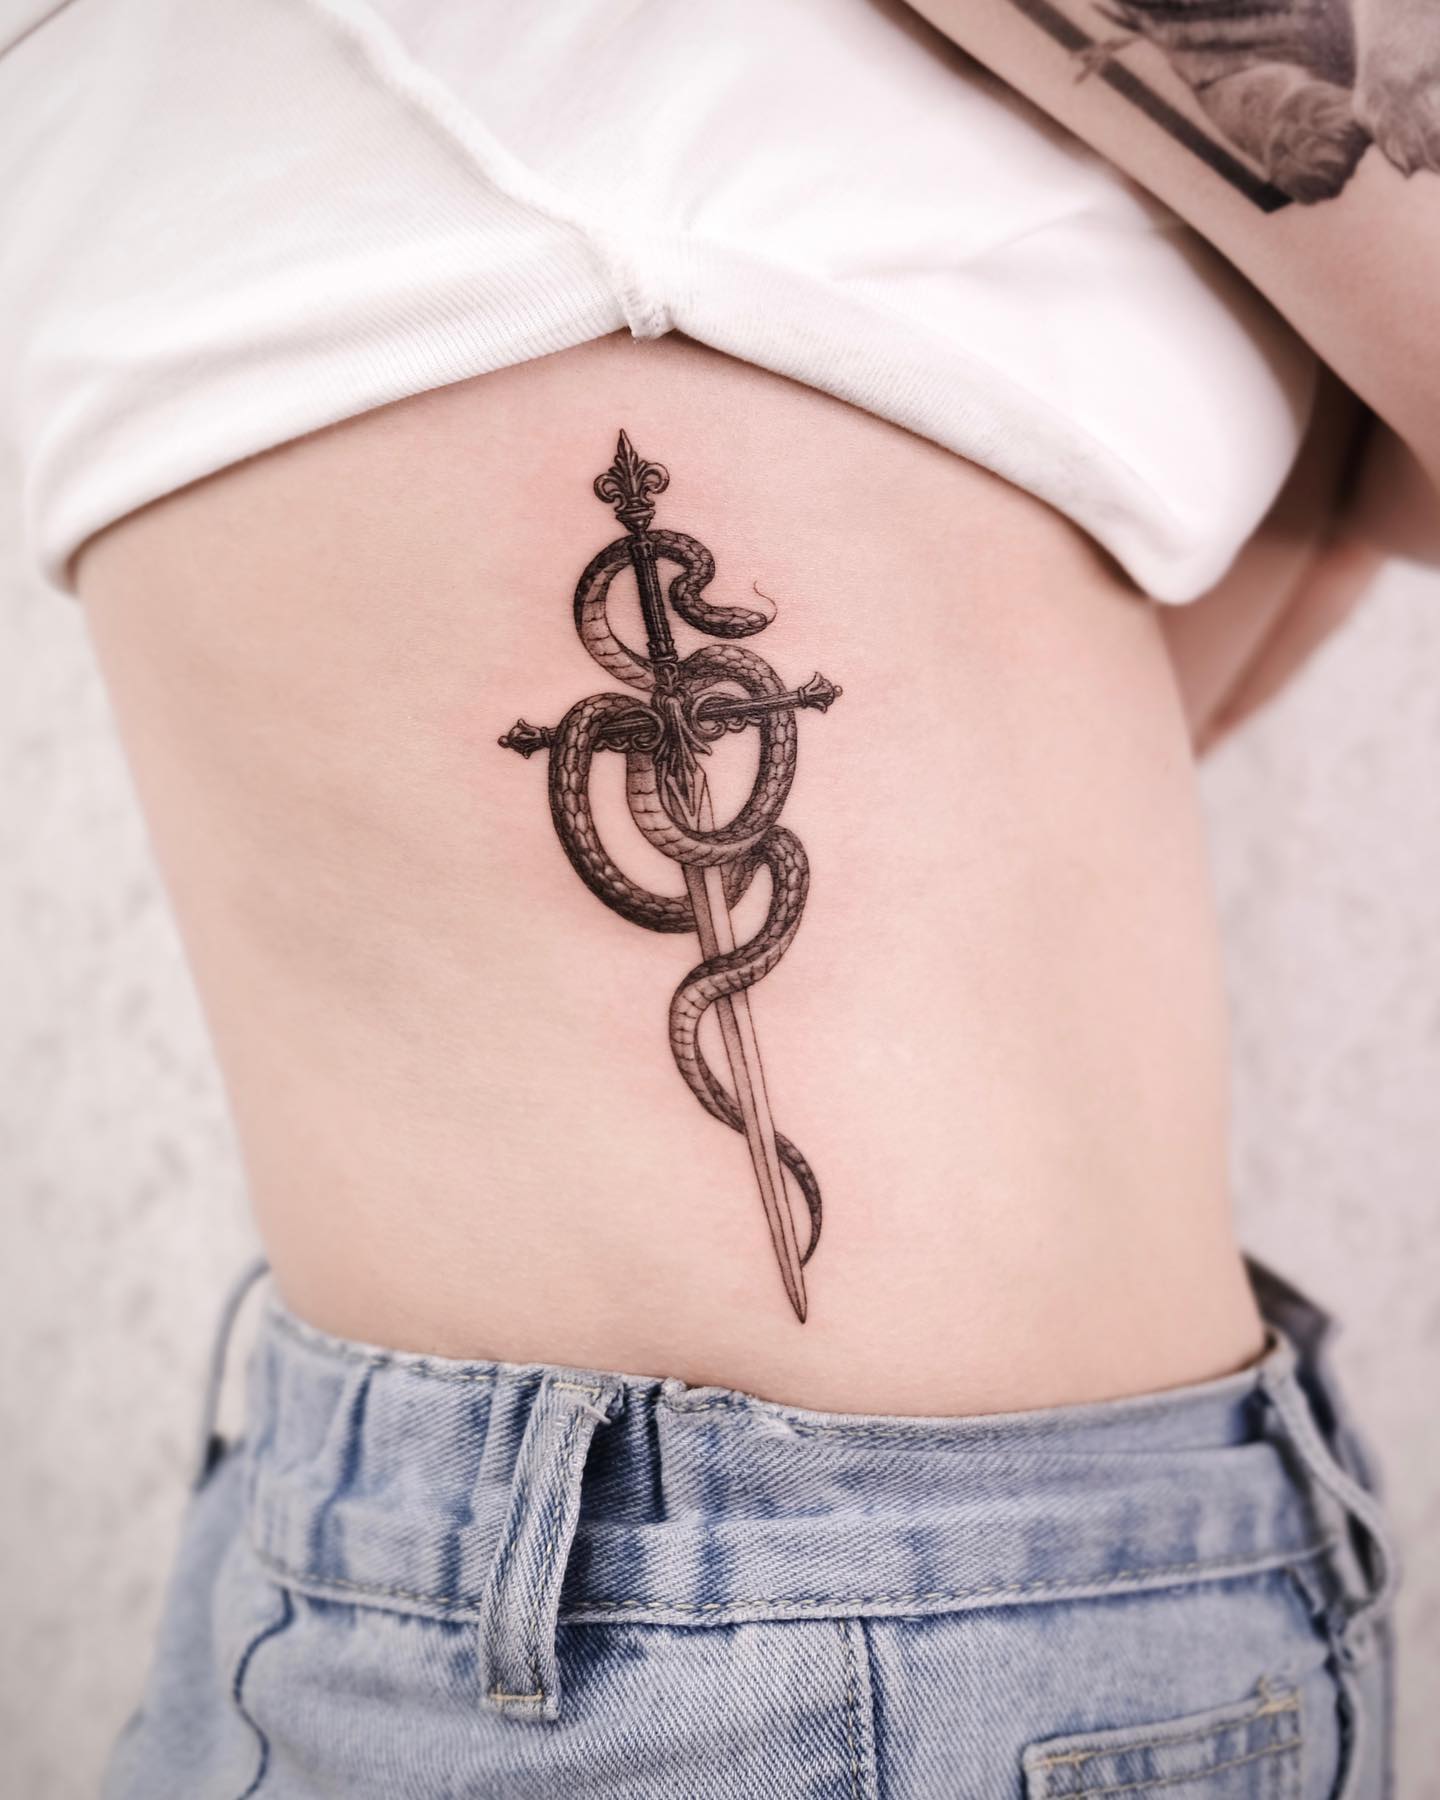 90+ Side Rib Tattoos for Women: Top Trends and Ideas for 2023 - 100 Tattoos